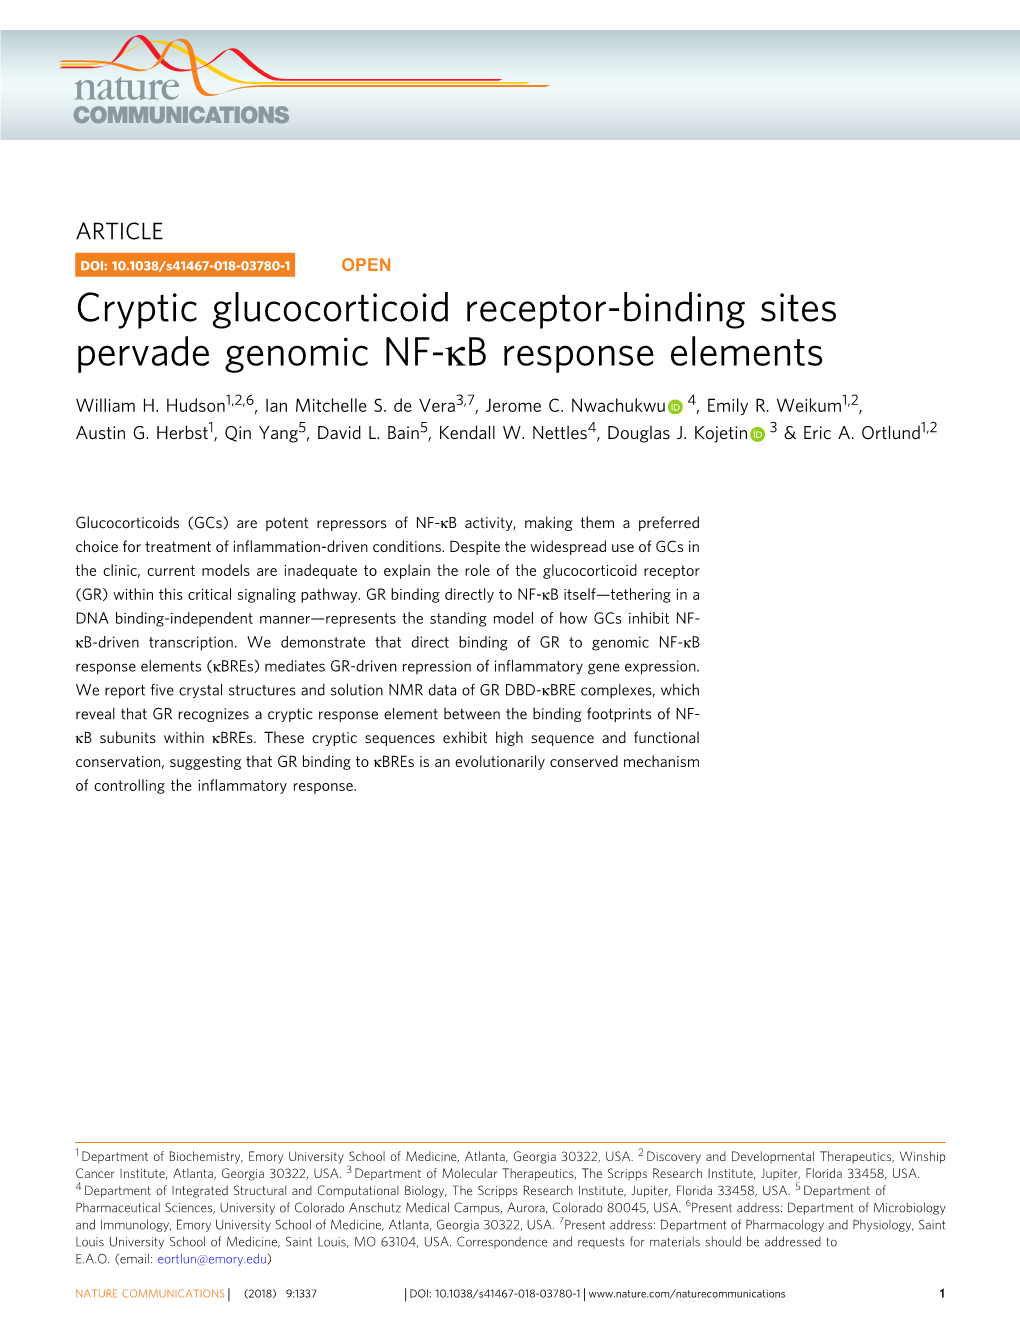 Cryptic Glucocorticoid Receptor-Binding Sites Pervade Genomic NF-Κb Response Elements